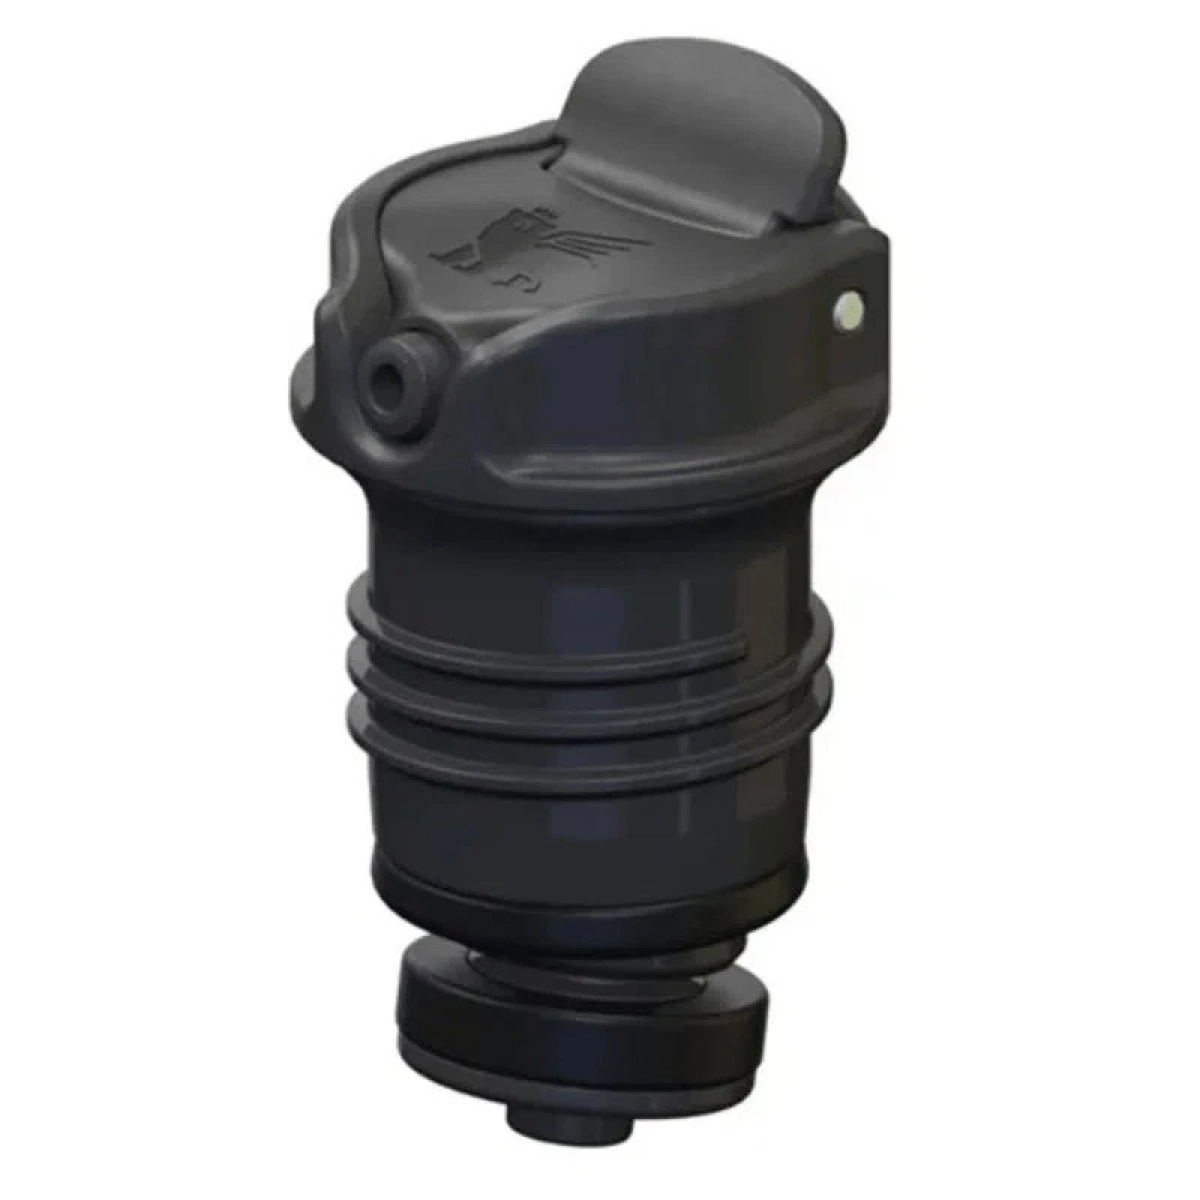 TERMO STANLEY MATE SYSTEM 0.8LT NEGRO